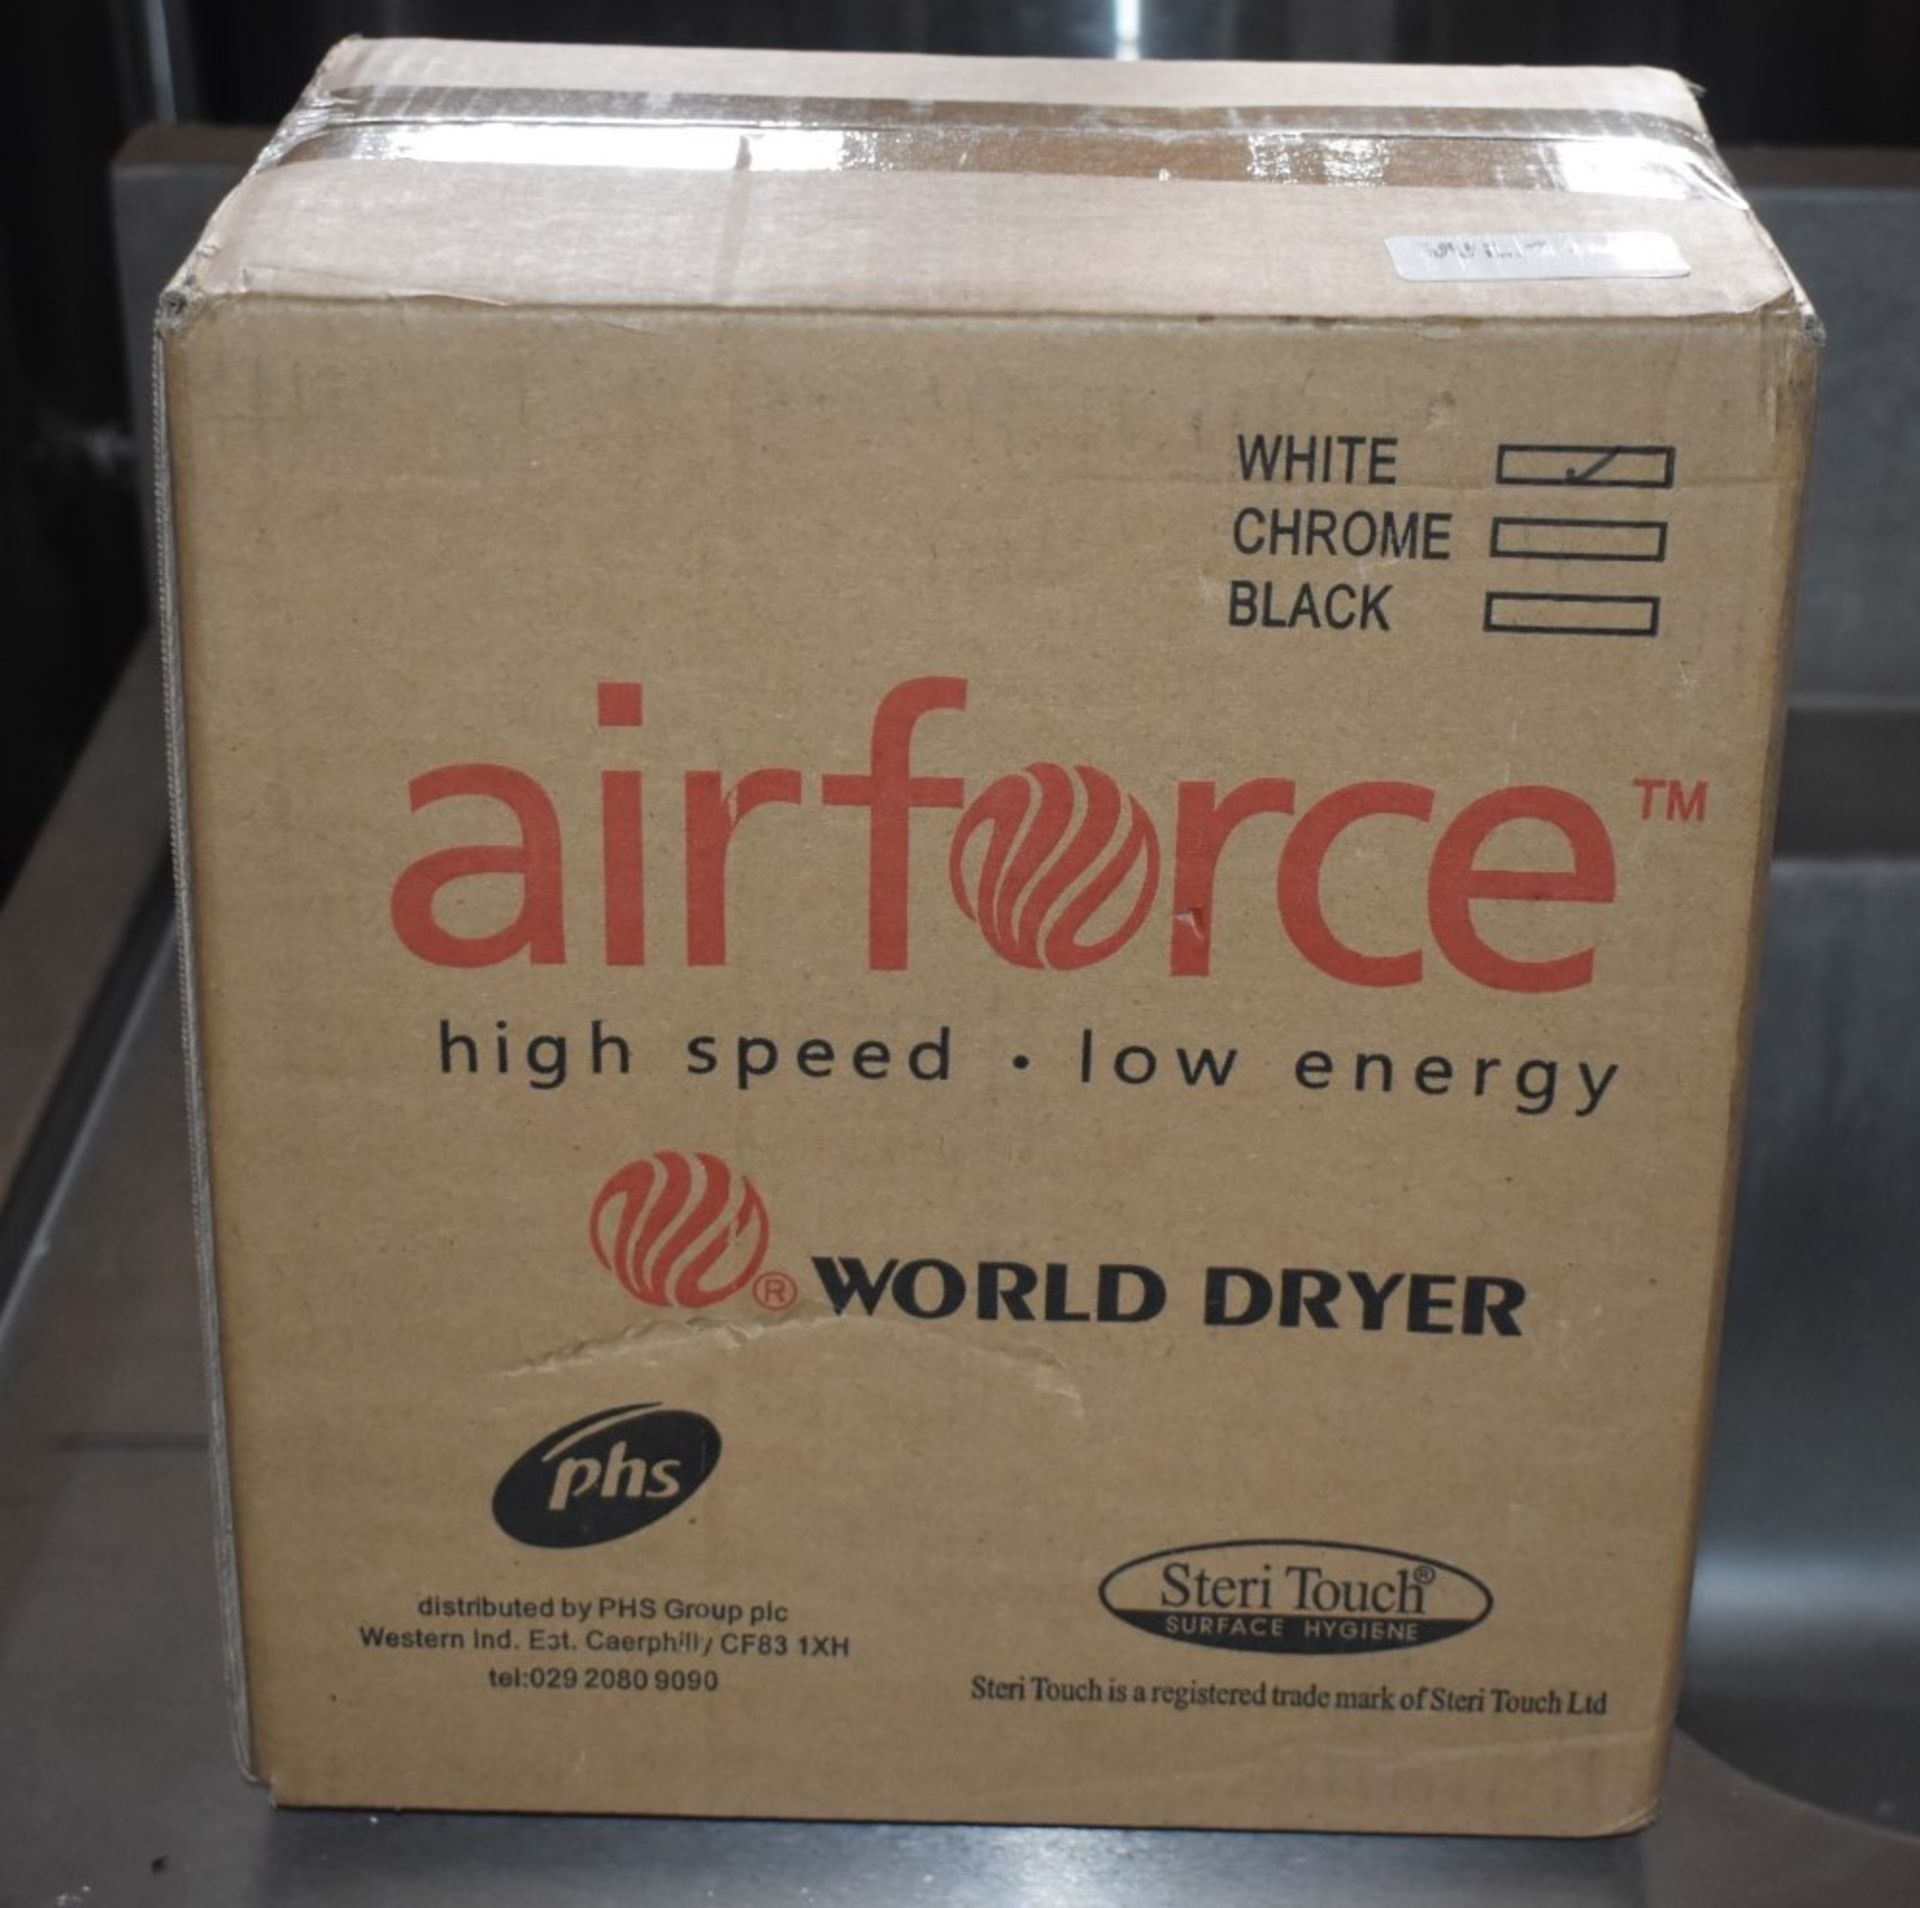 1 x Air Force High Speed Low Energy Electric Hand Dryer - Mode J48-974W3 - Brand New and Boxed - - Image 2 of 4